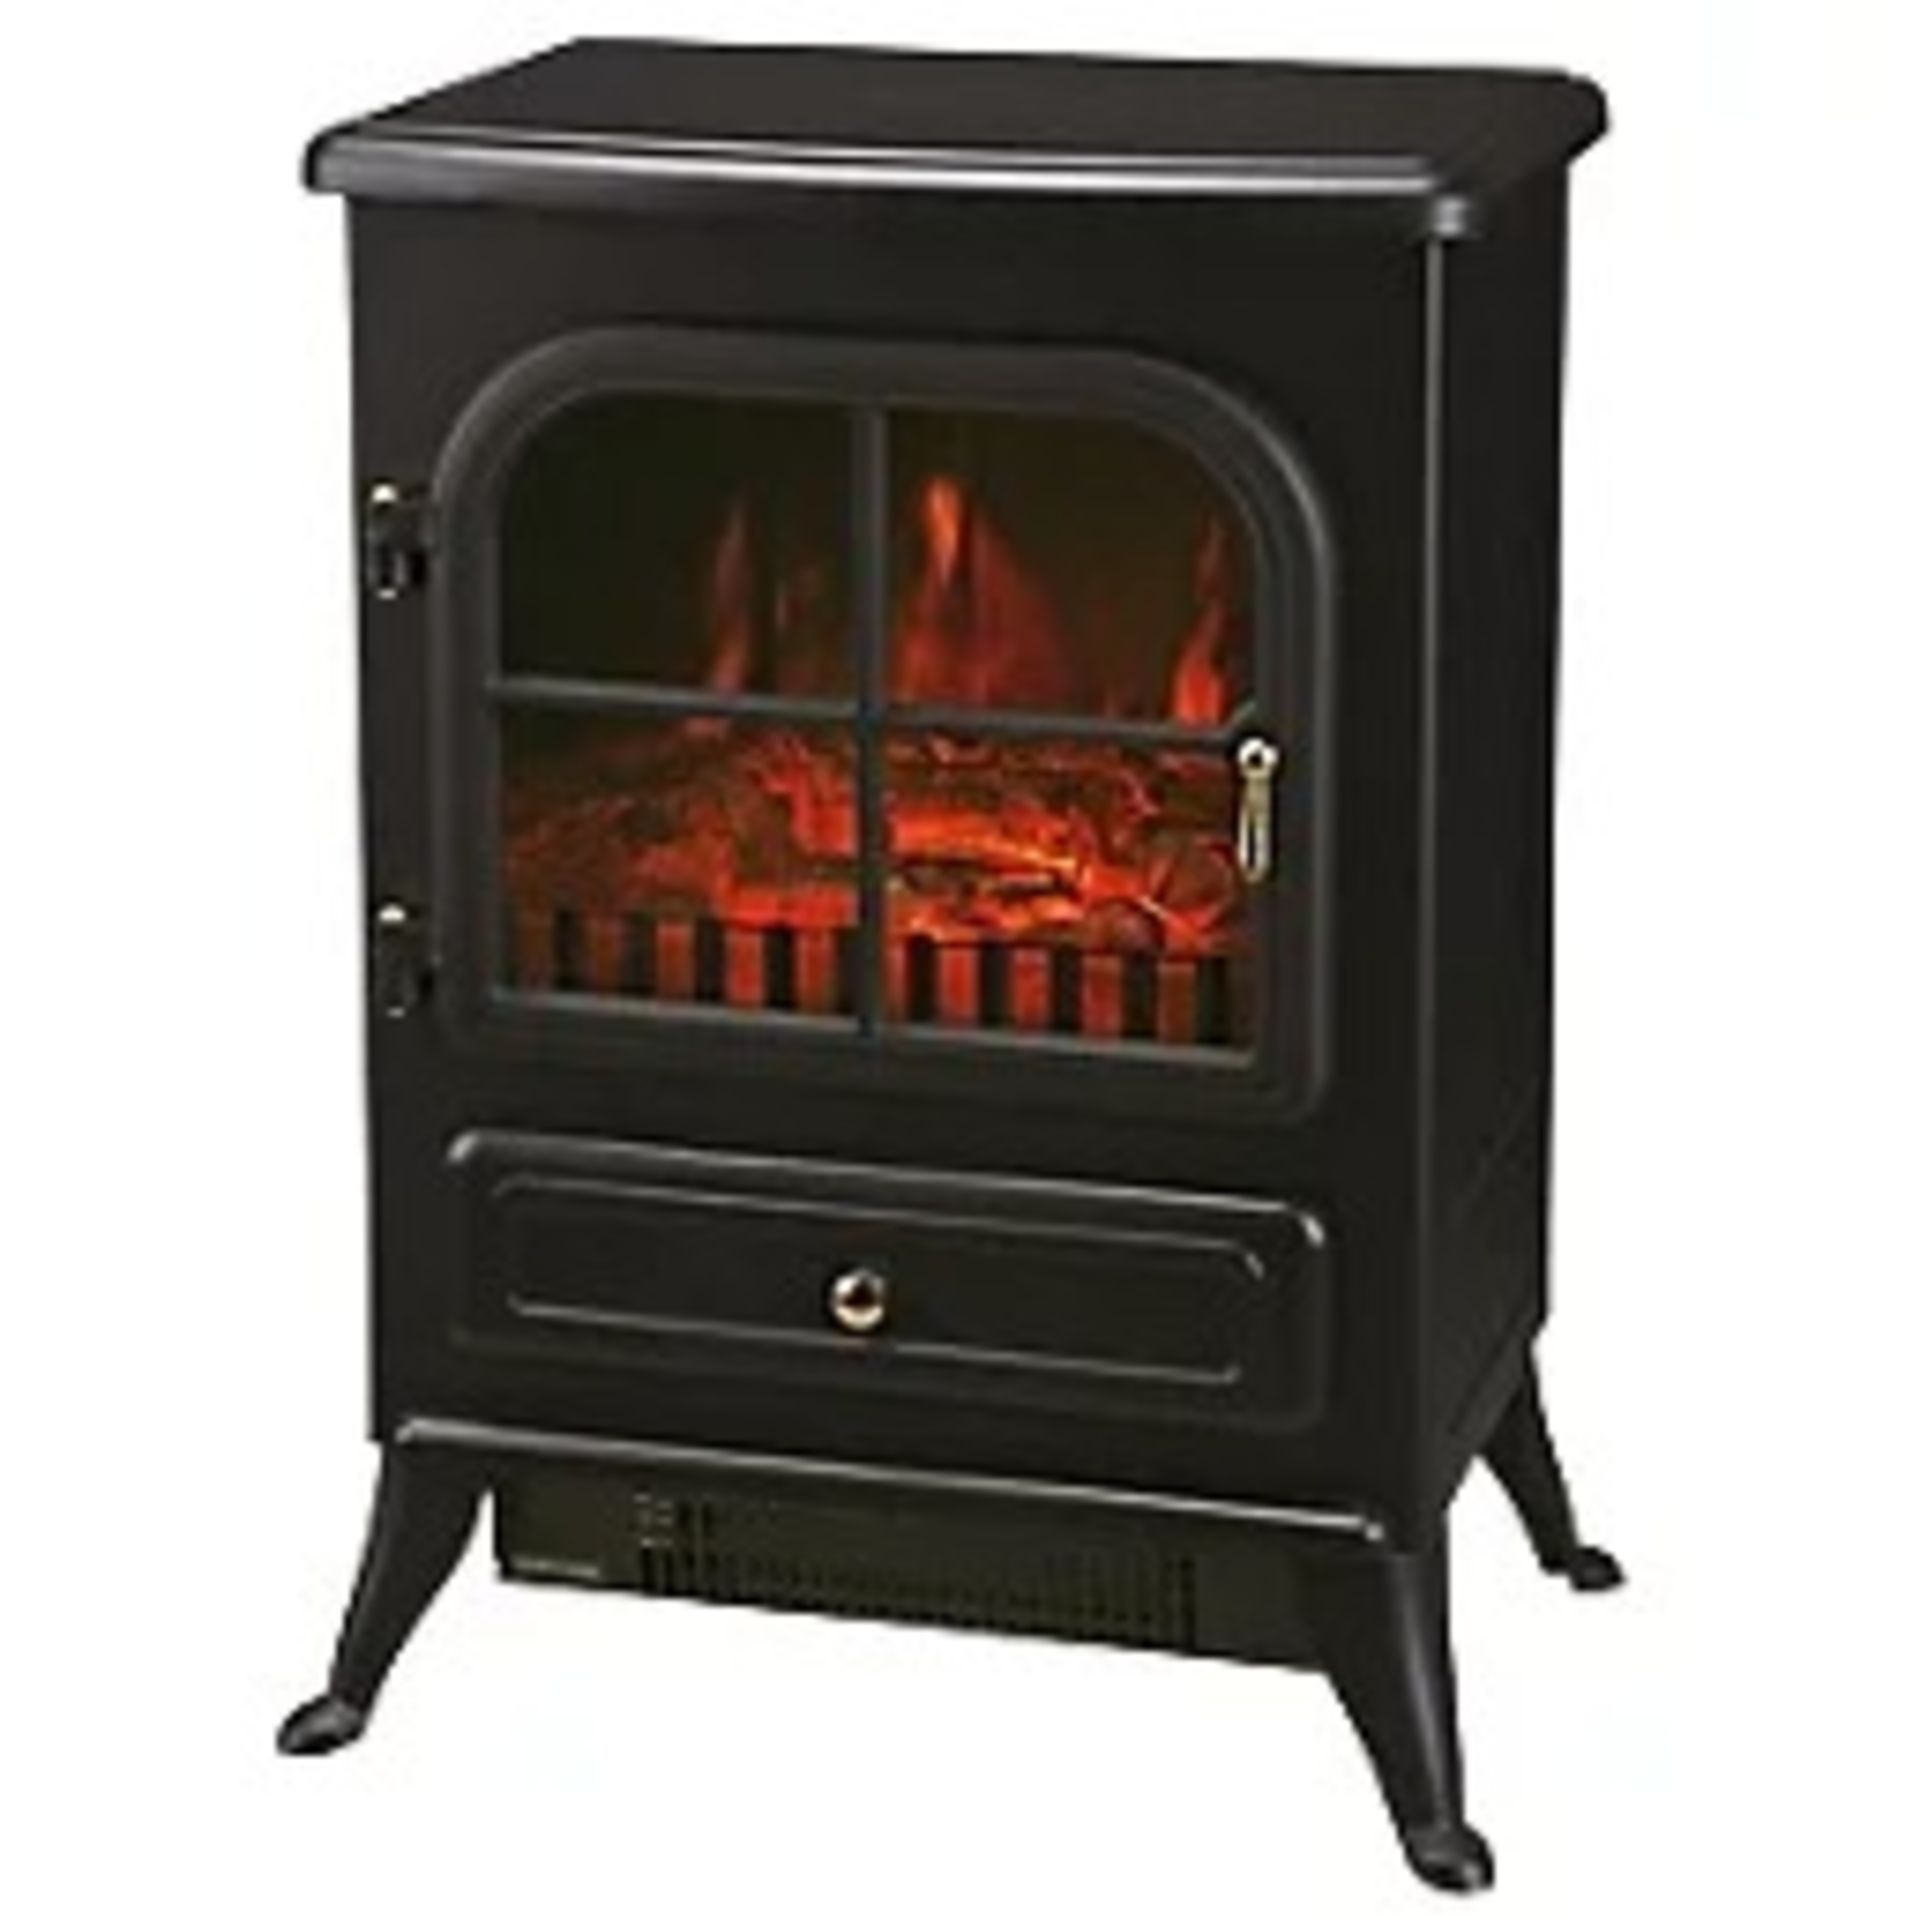 BLACK ELECTRIC STOVE FIRE - ER47